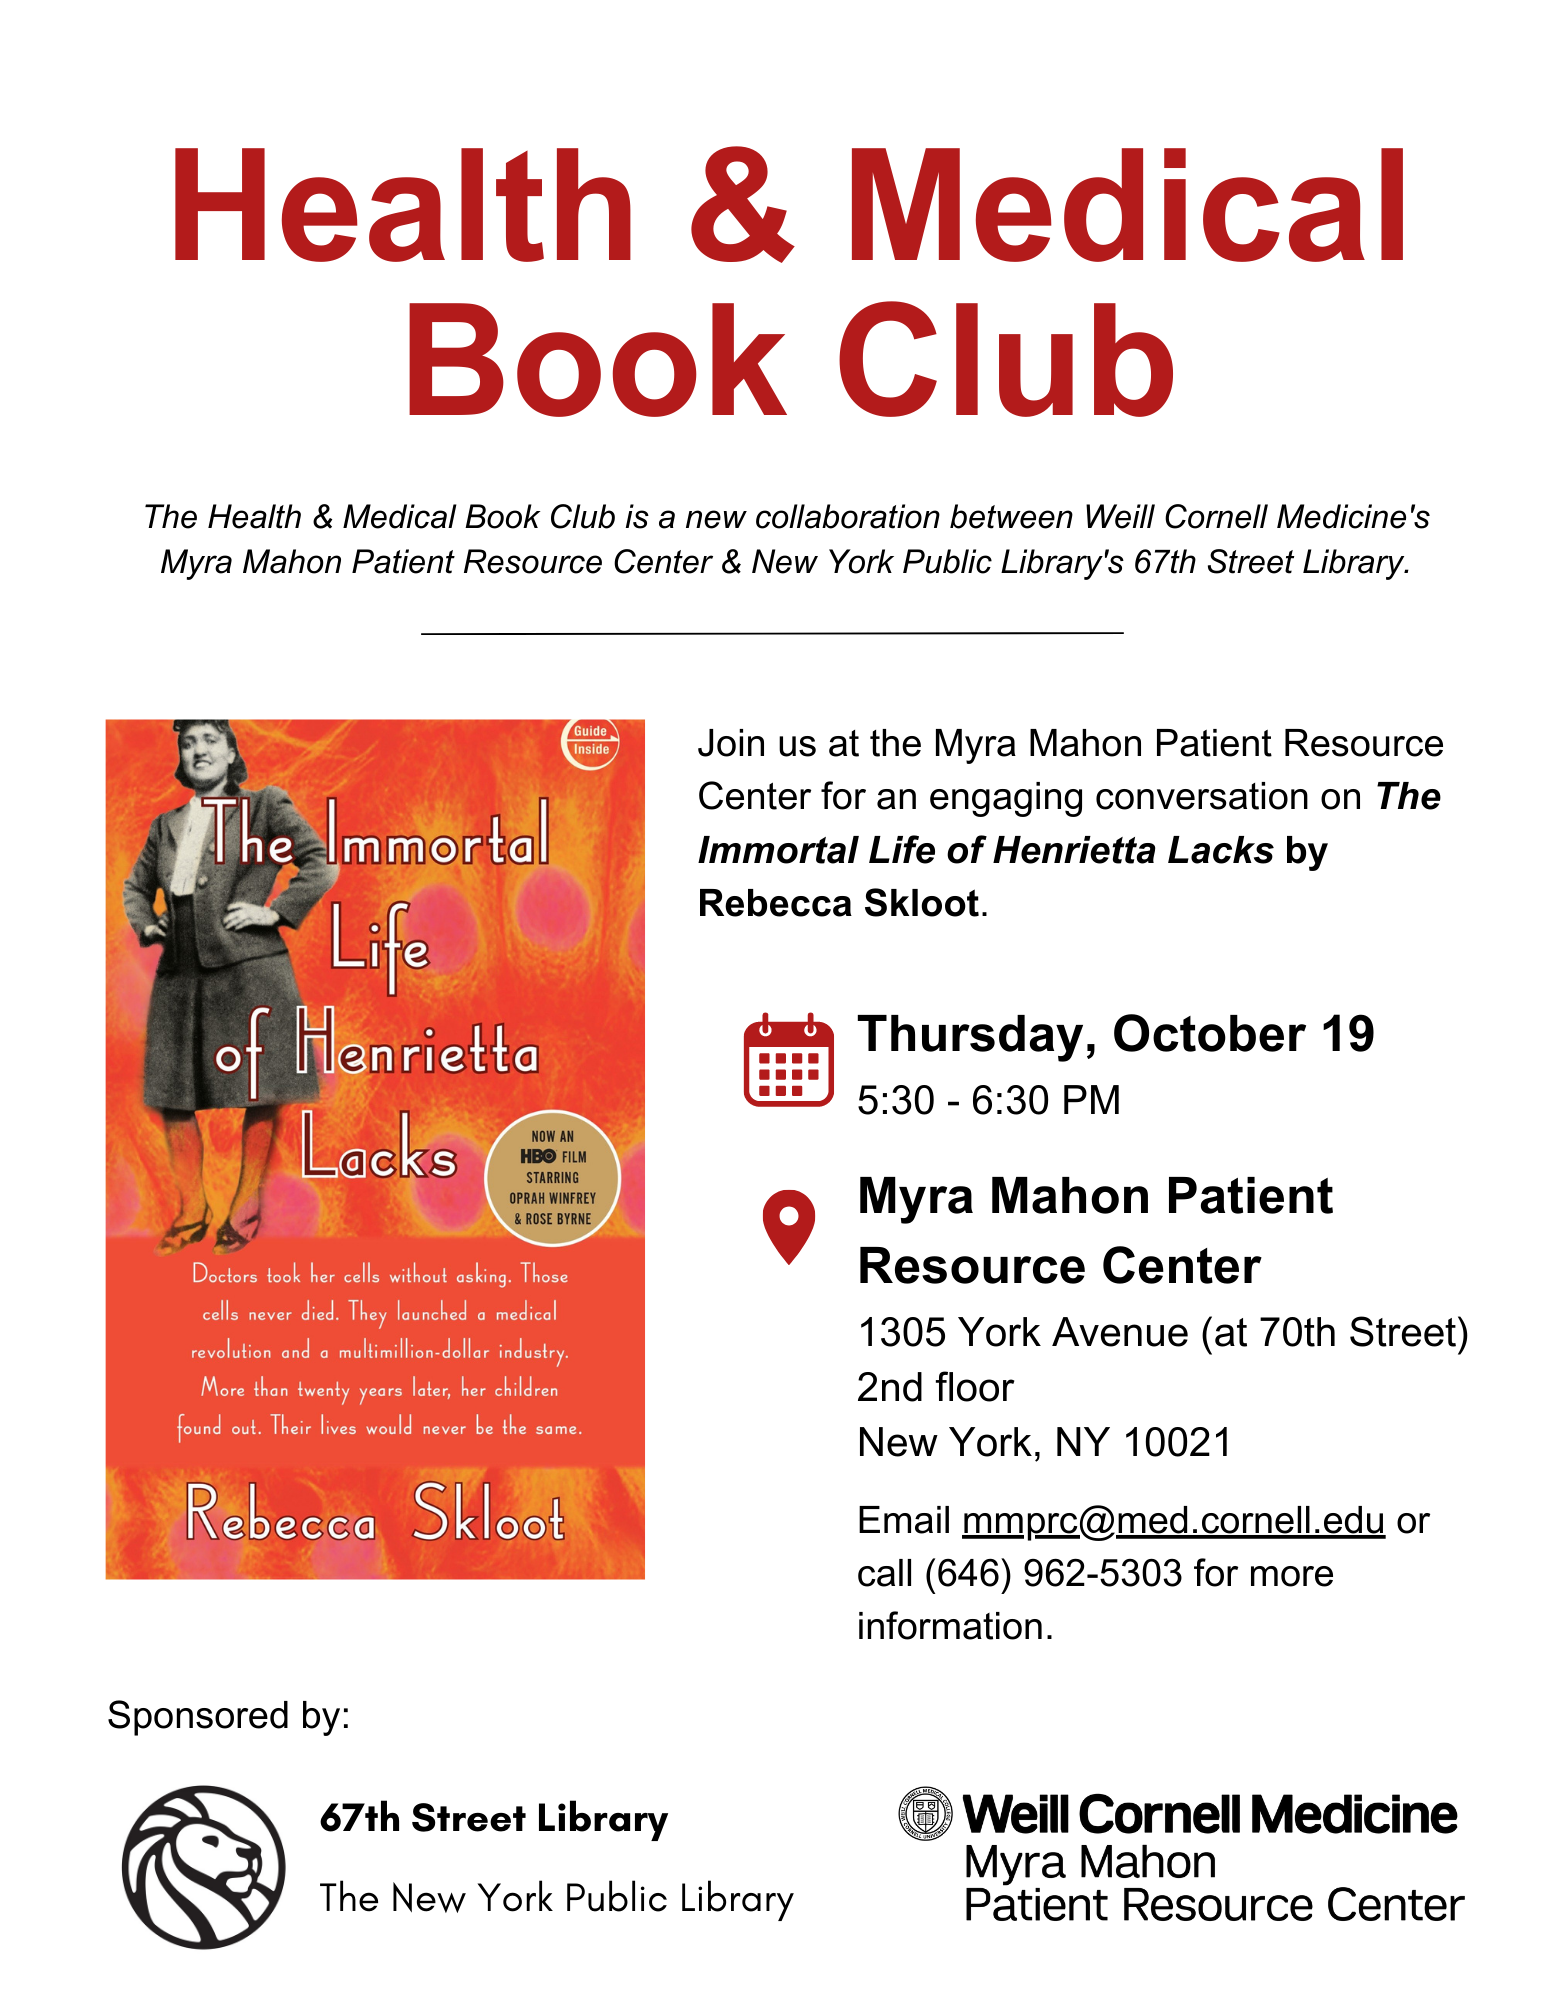 Health & Medical Book Club Discussion of The Immortal Life of Henrietta  Lacks by Rebecca Skloot